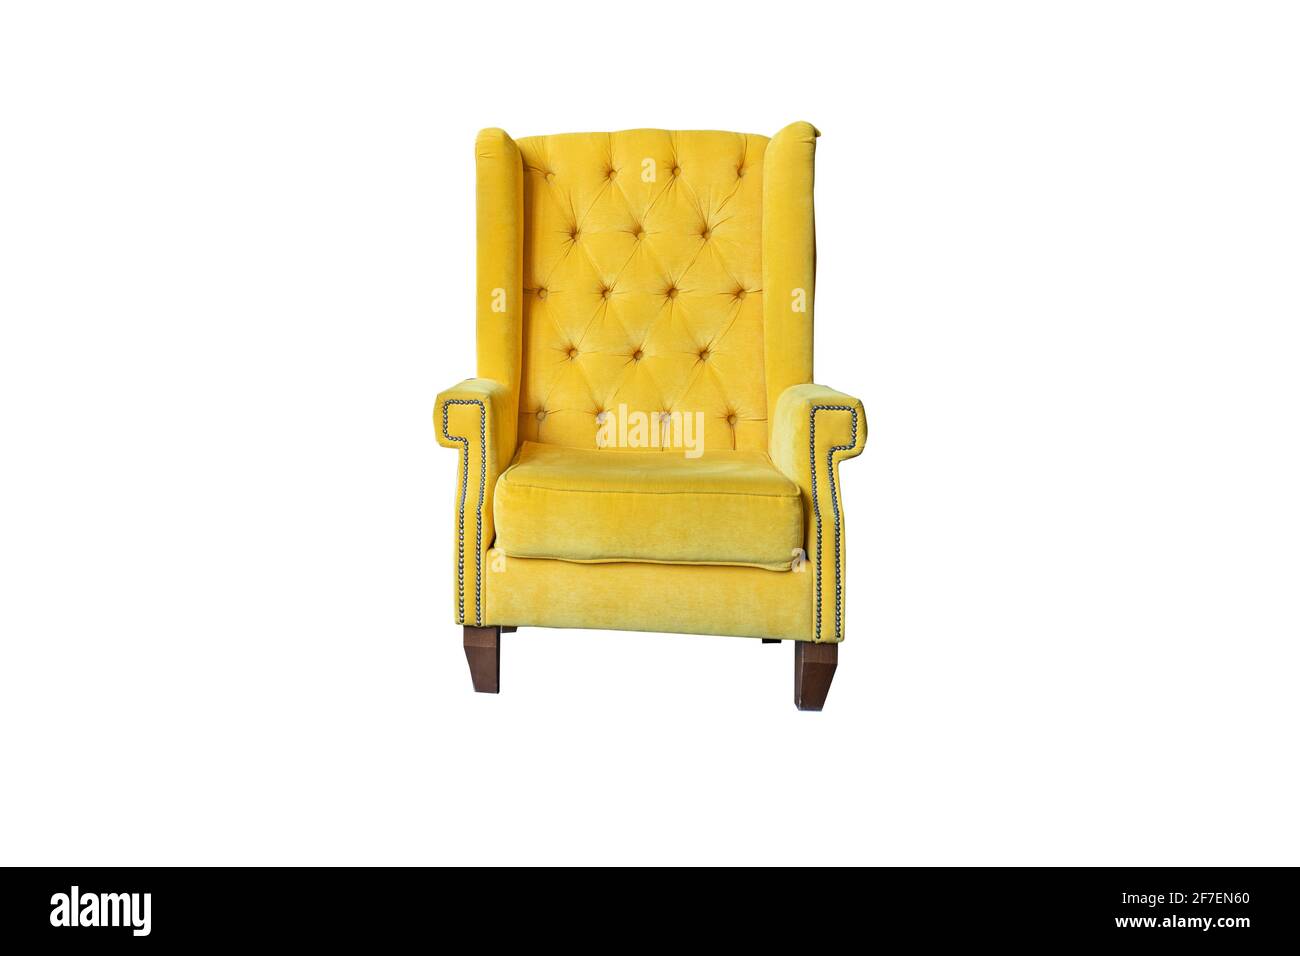 yellow soft chair. isolate on white background. Stock Photo